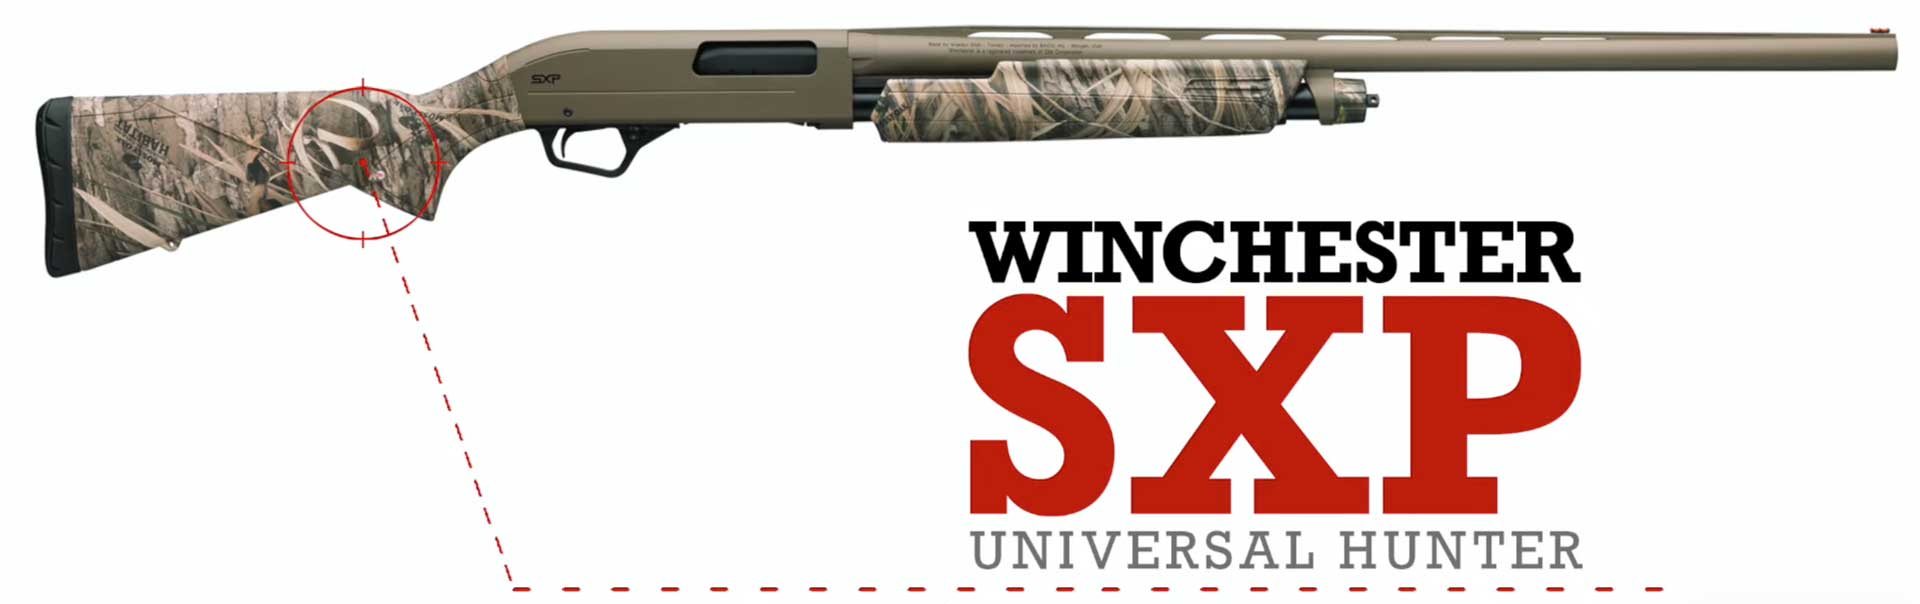 right side camouflage shotgun text on image noting "Winchester SXP Universal Hunter"